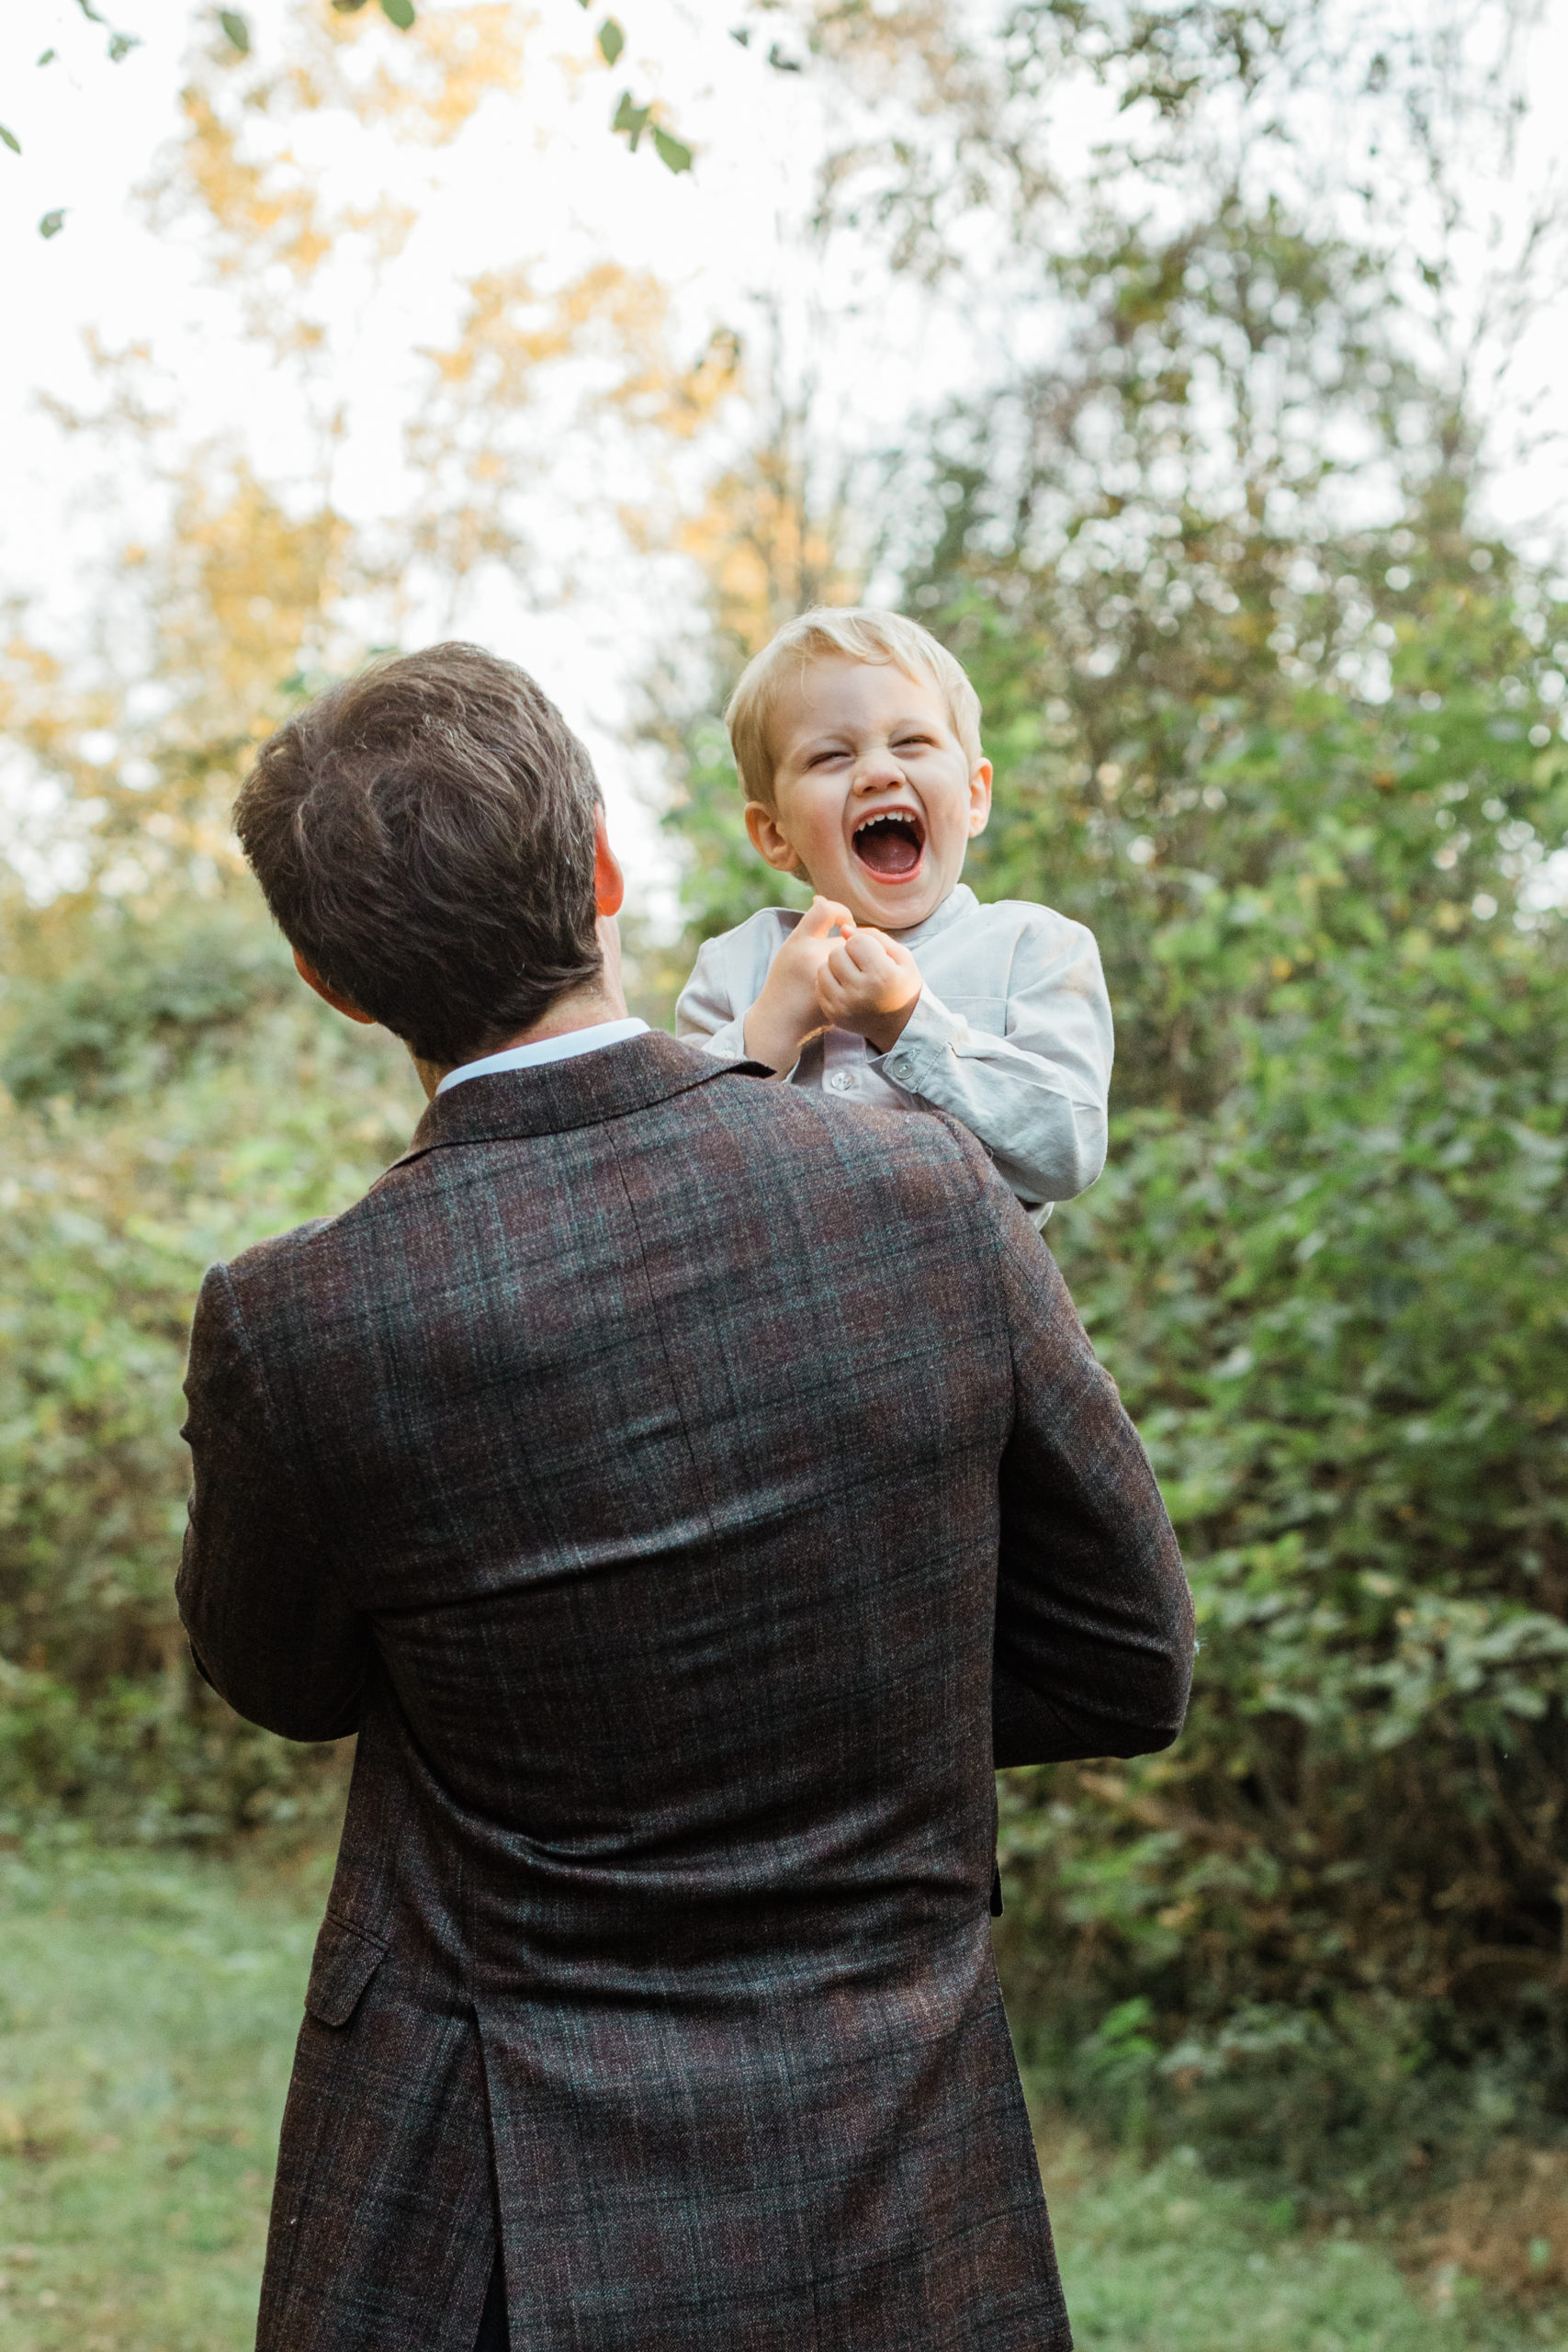 dad's back facing the camera, wearing plaid blazer. dad carrying smiling son over his shoulders.